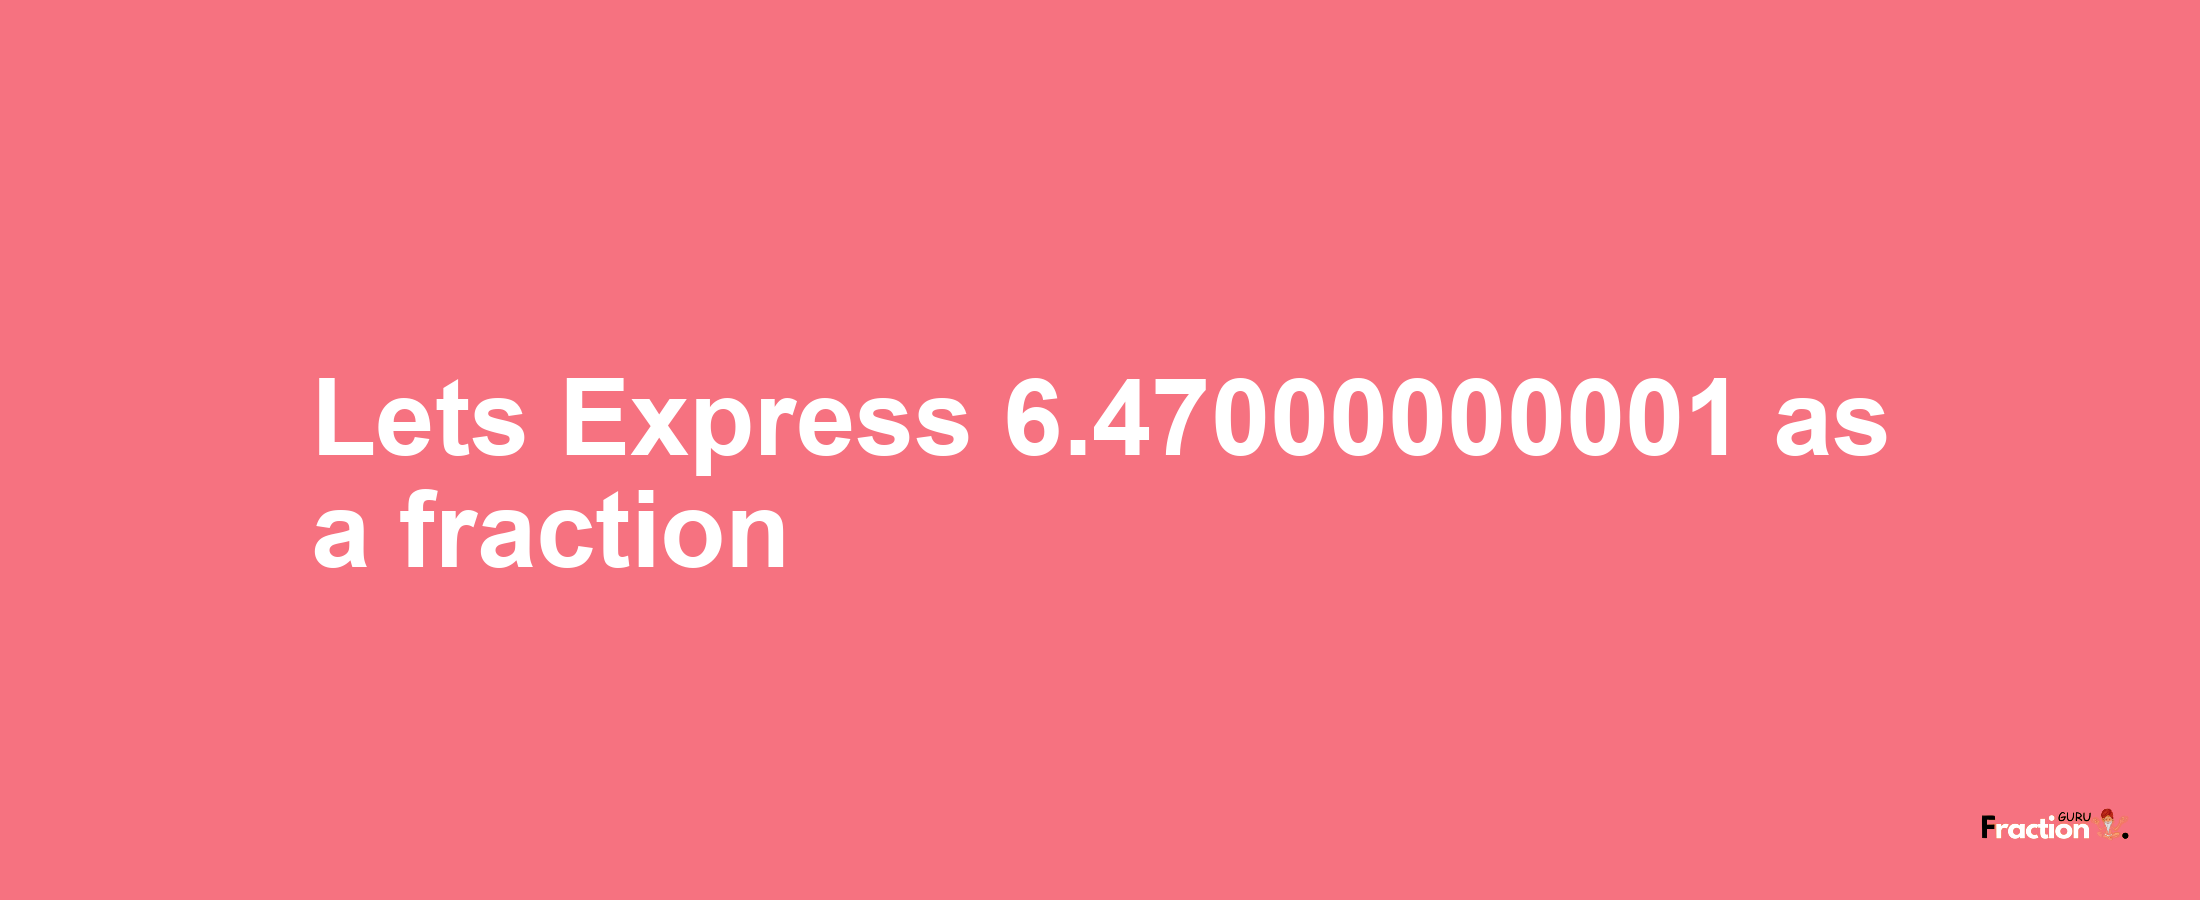 Lets Express 6.47000000001 as afraction